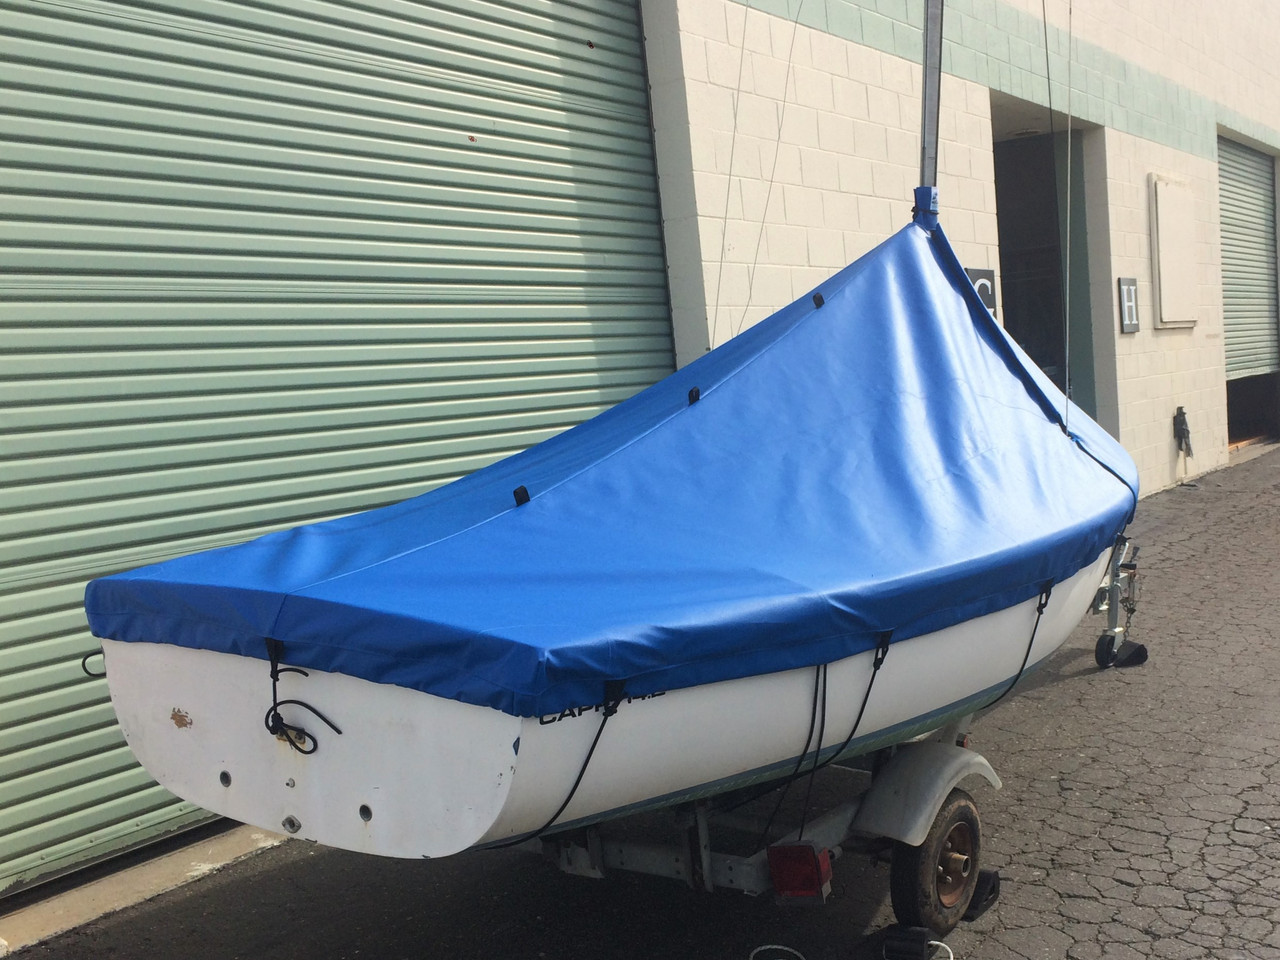 A Mast Up Peaked Cover from SLO Sail and Canvas will shed water and debris - keeping your Capri 14.2 by Catalina clean and ready to sail in minutes.